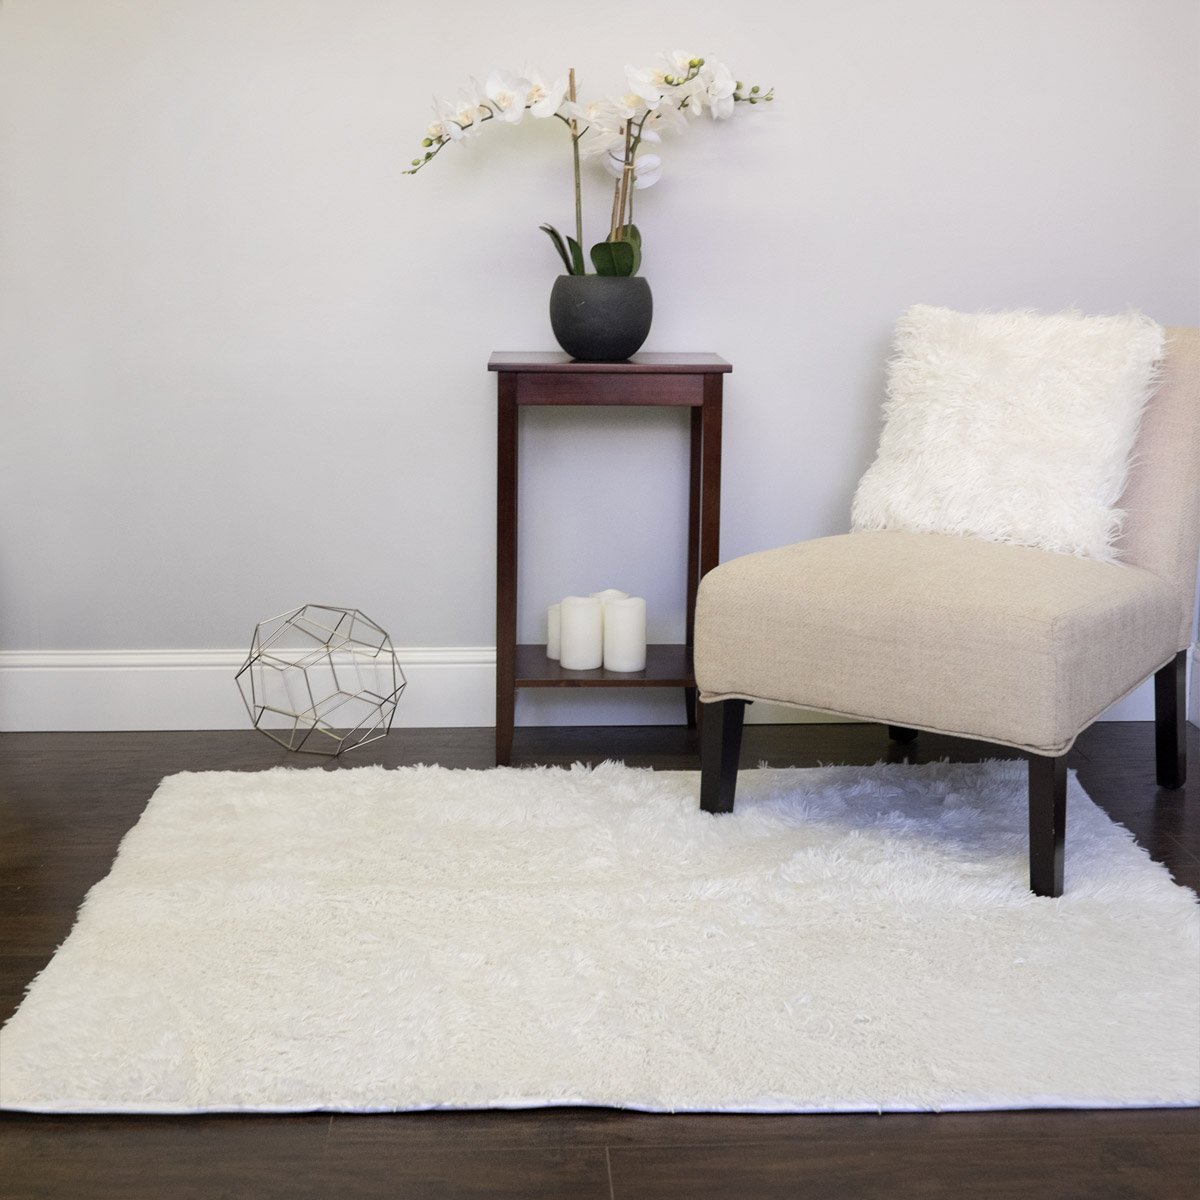 Faux Fur Rectangle Floor Area Rug 4Ft By 5Ft White - Lifestyle